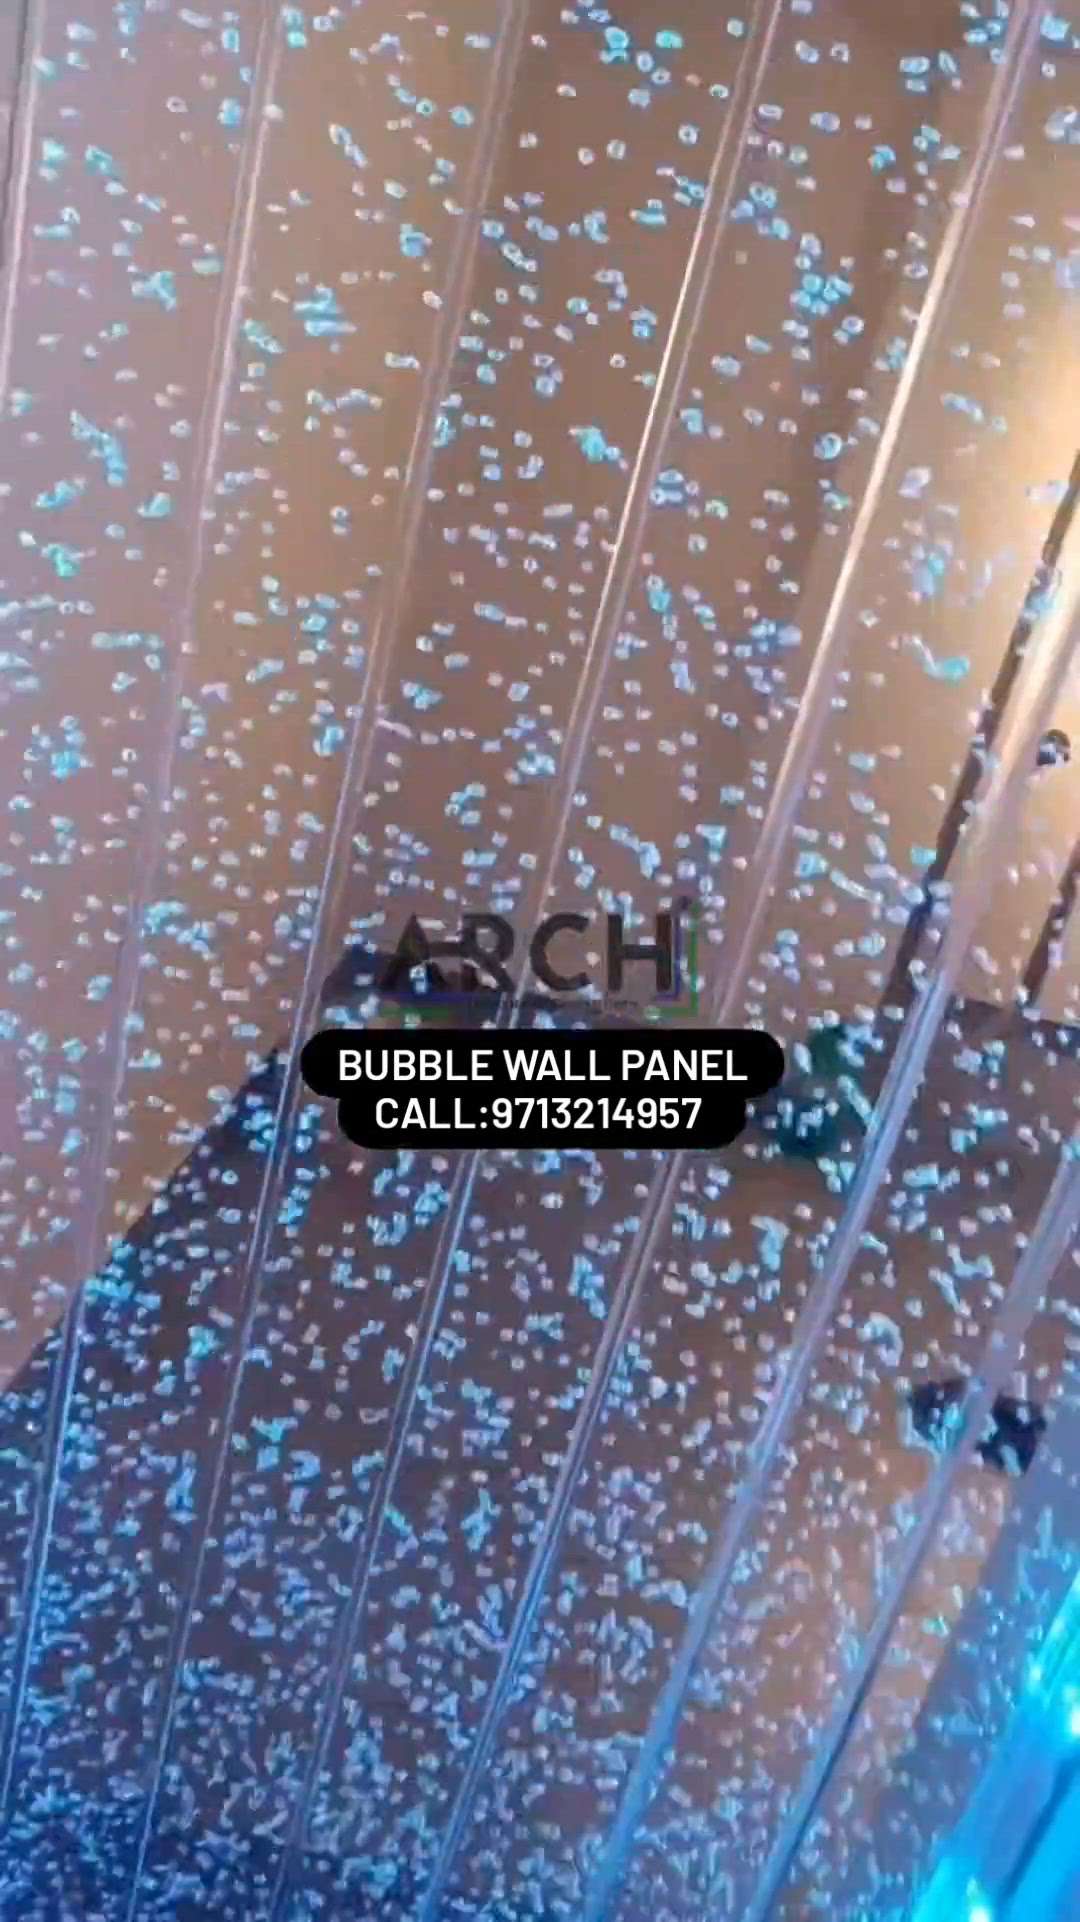 Bubble wall Panel 
call: 9713214957
ARCH Interior Redesigners

 #WallDecors  #WallDesigns  #bubblewall  #bubbleacrylicwall  #walldecoration  #wallpartition  #customized_wall  #LivingRoomWallPaper  #LivingroomTexturePainting